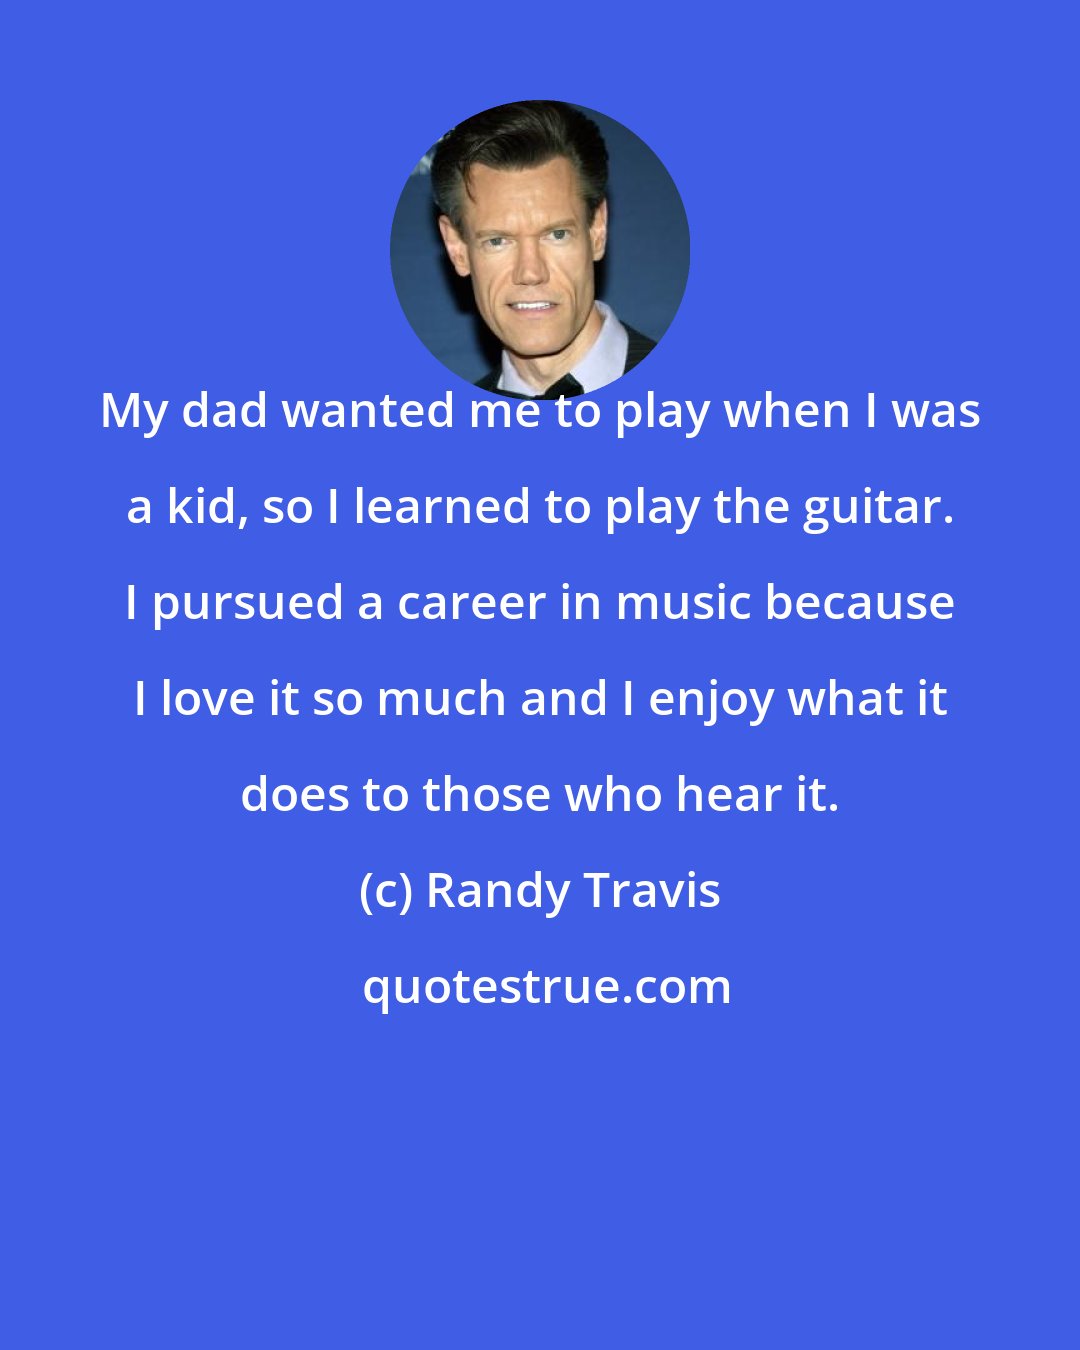 Randy Travis: My dad wanted me to play when I was a kid, so I learned to play the guitar. I pursued a career in music because I love it so much and I enjoy what it does to those who hear it.